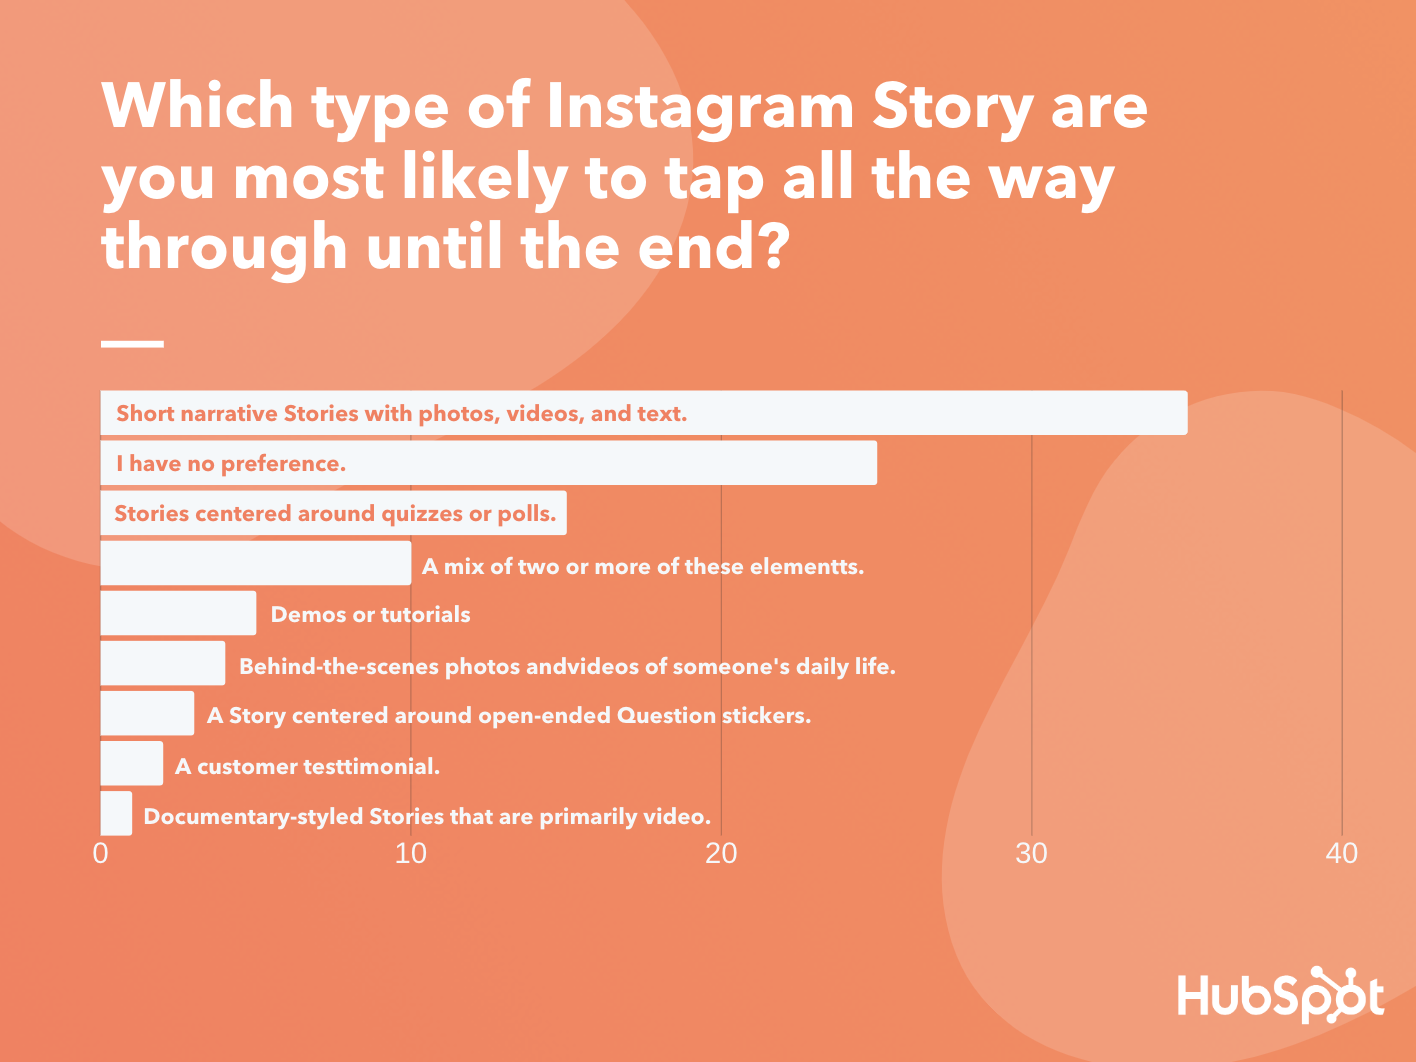 Visual Content Marketing Statistics: A chart that ranks which types of Instagram Story users are most likely to tap through.